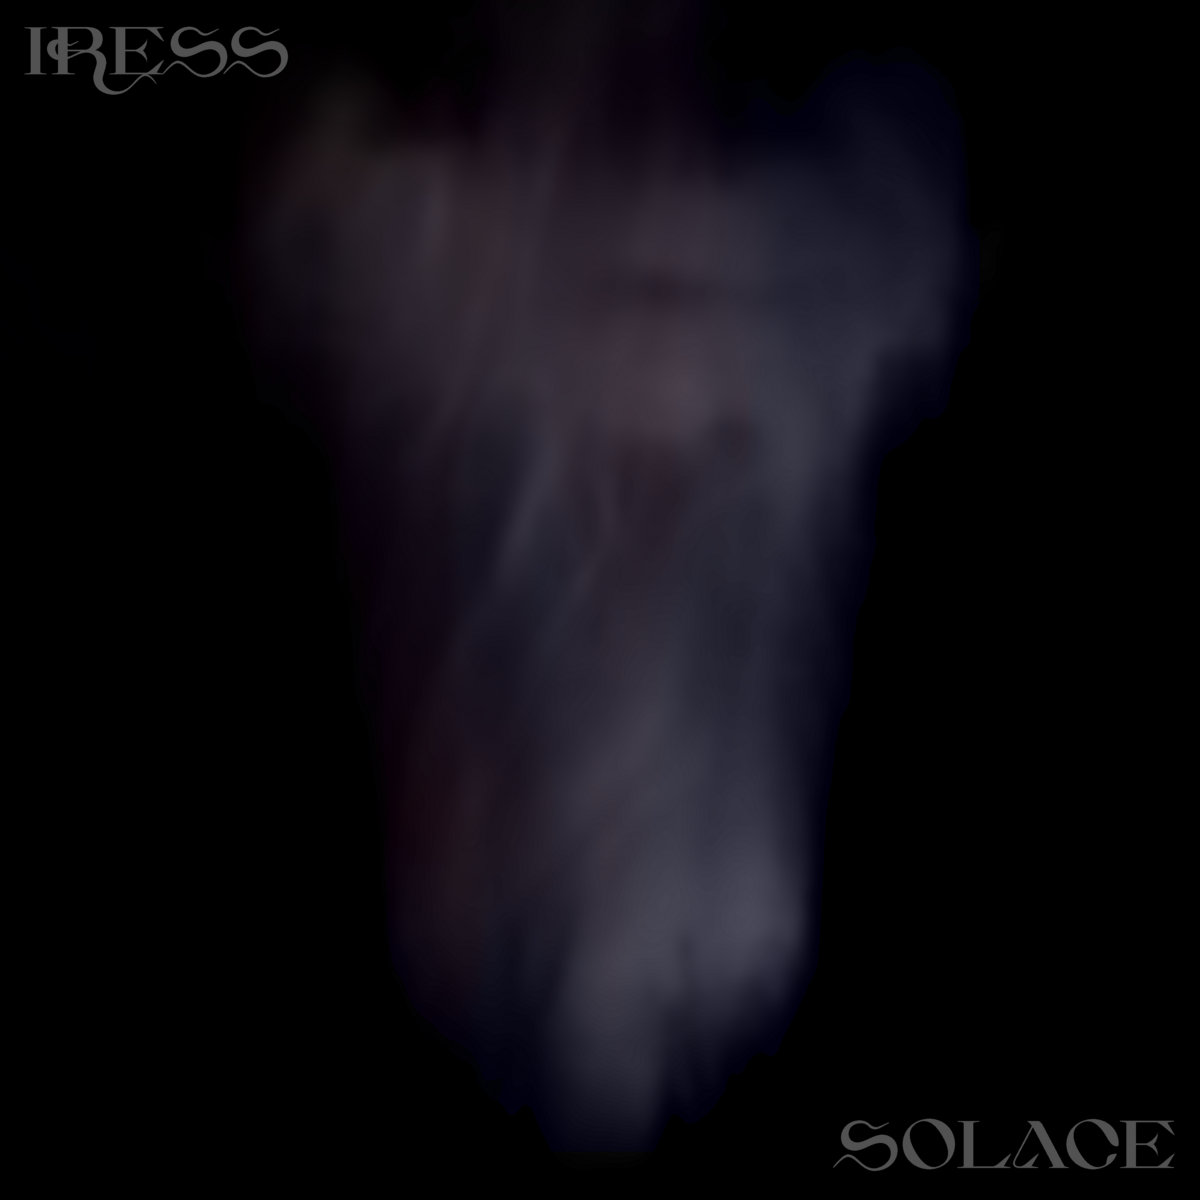 Iress Solace cover artwork